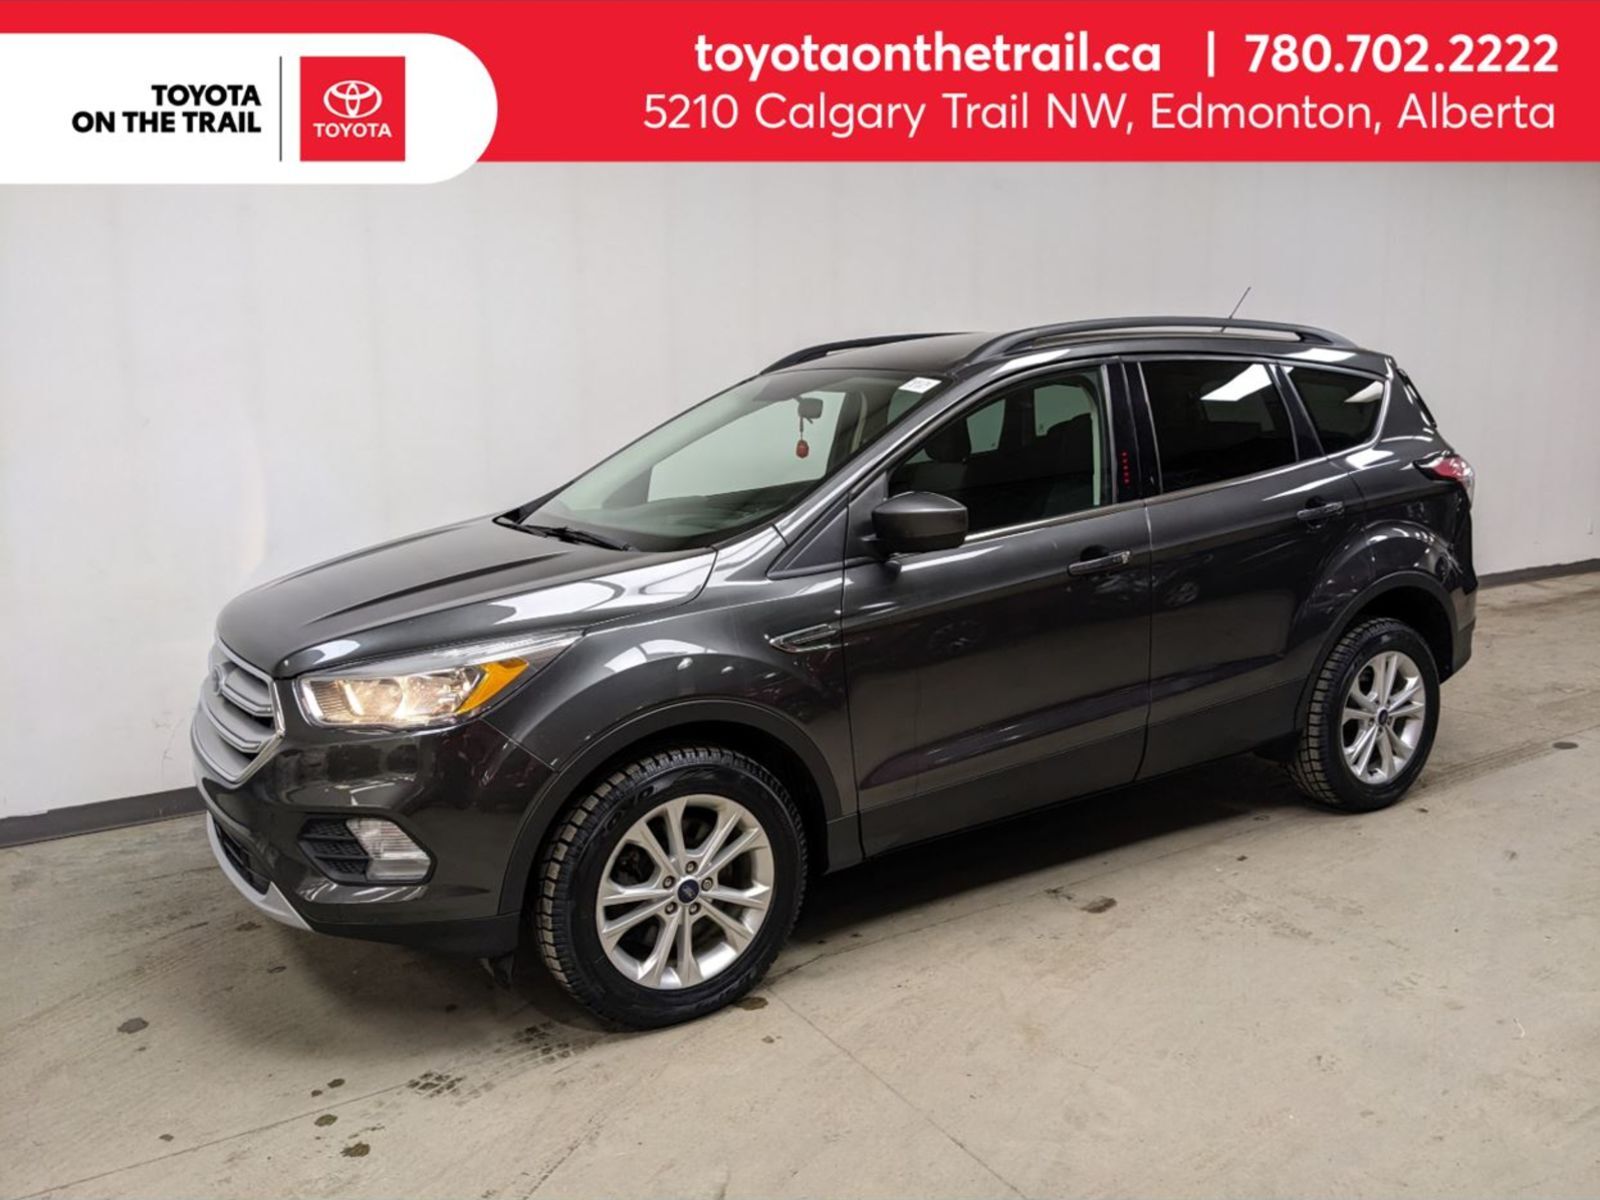 2018 Ford Escape SE; 4WD, WINTER TIRES, HEATED SEATS, BACKUP CAMERA